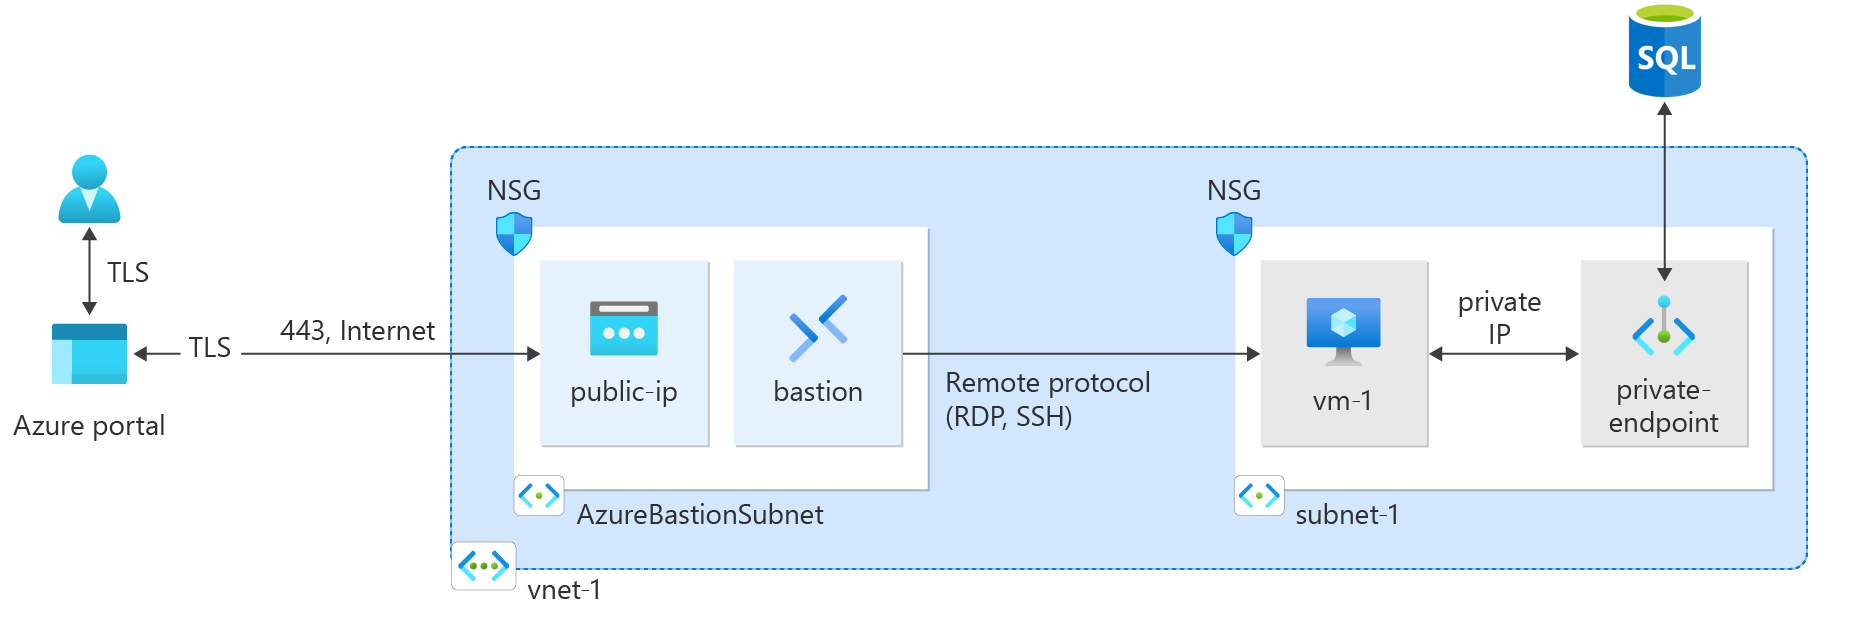 Diagram of resources created in private endpoint quickstart.